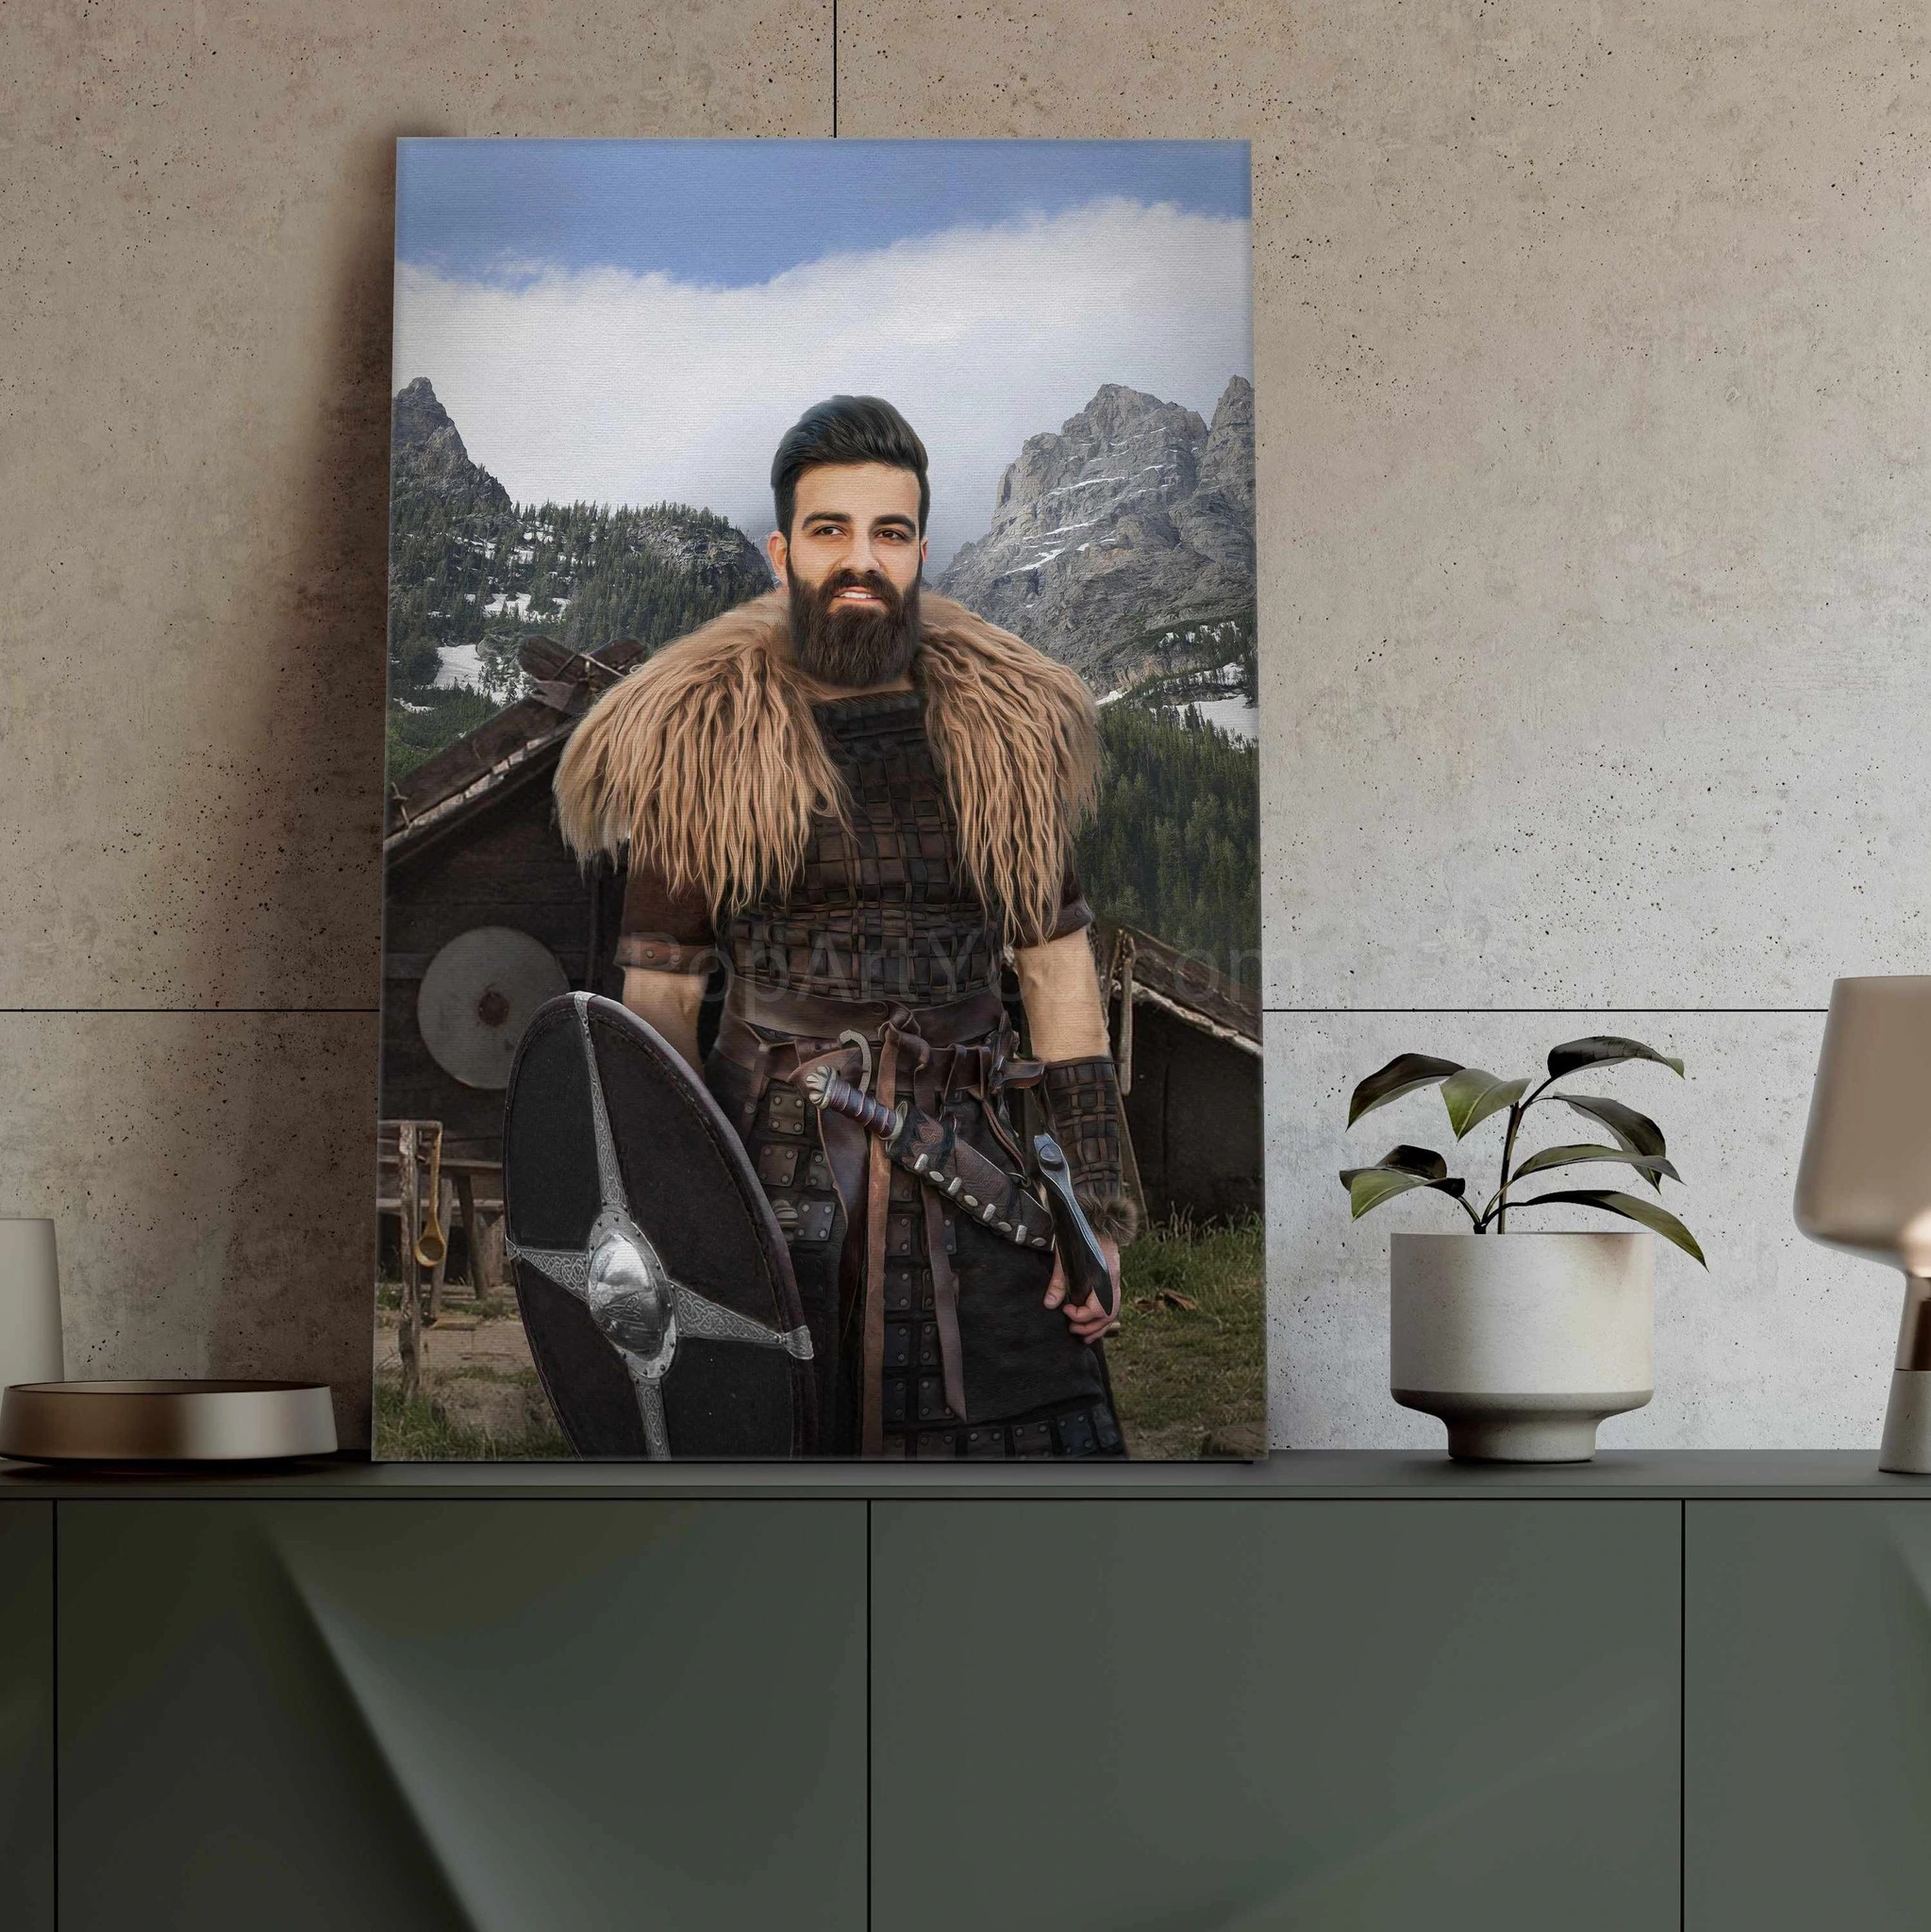 Shield in the mountains personalized male portrait poster canvas print